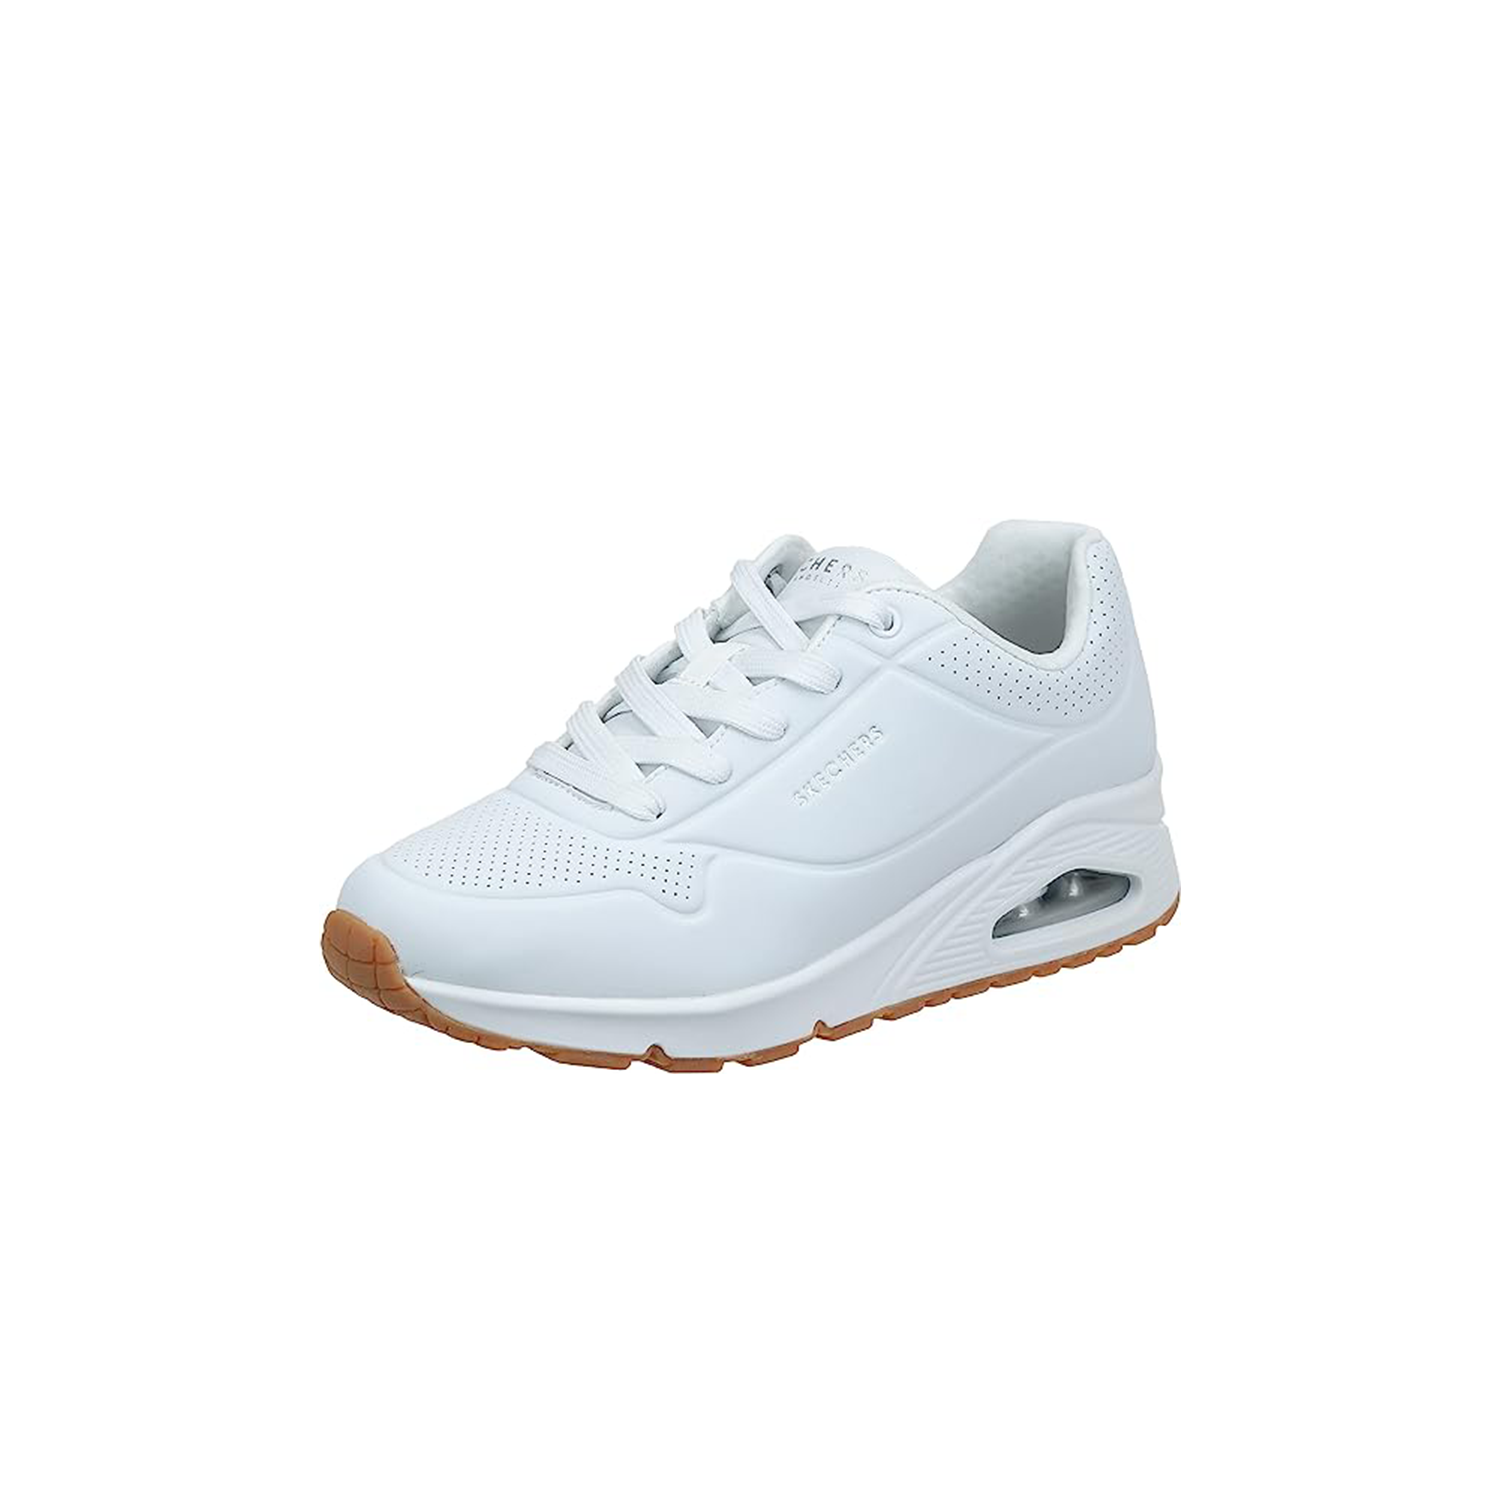 Skechers Women's's Uno -Stand on Air Trainers, White, 3 Wide